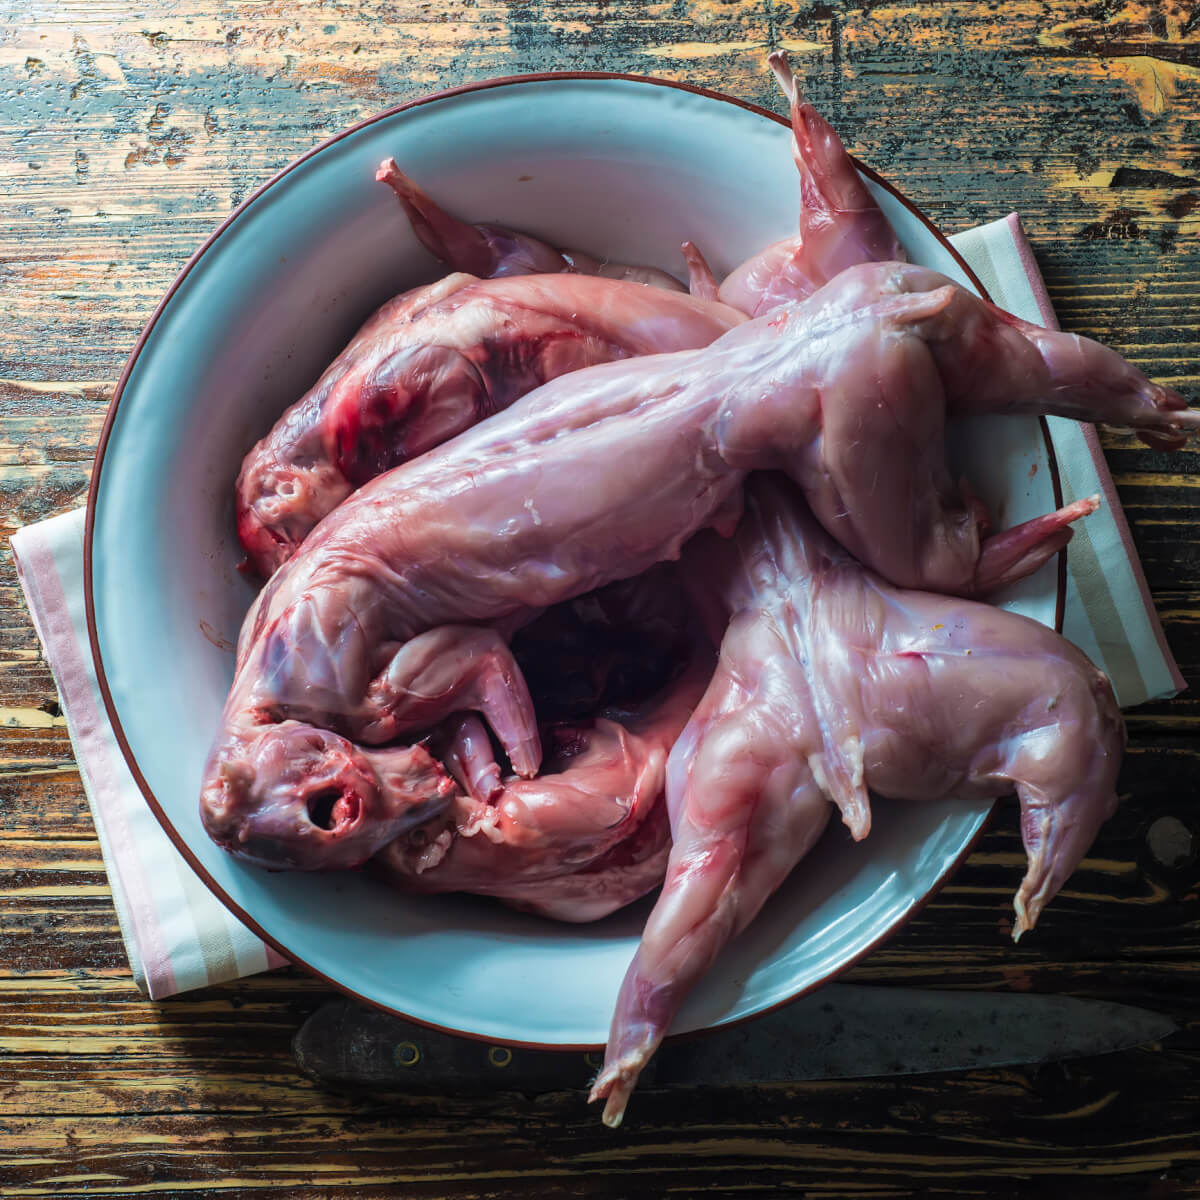 Furry Feast: How to Prep Rabbit and Squirrel